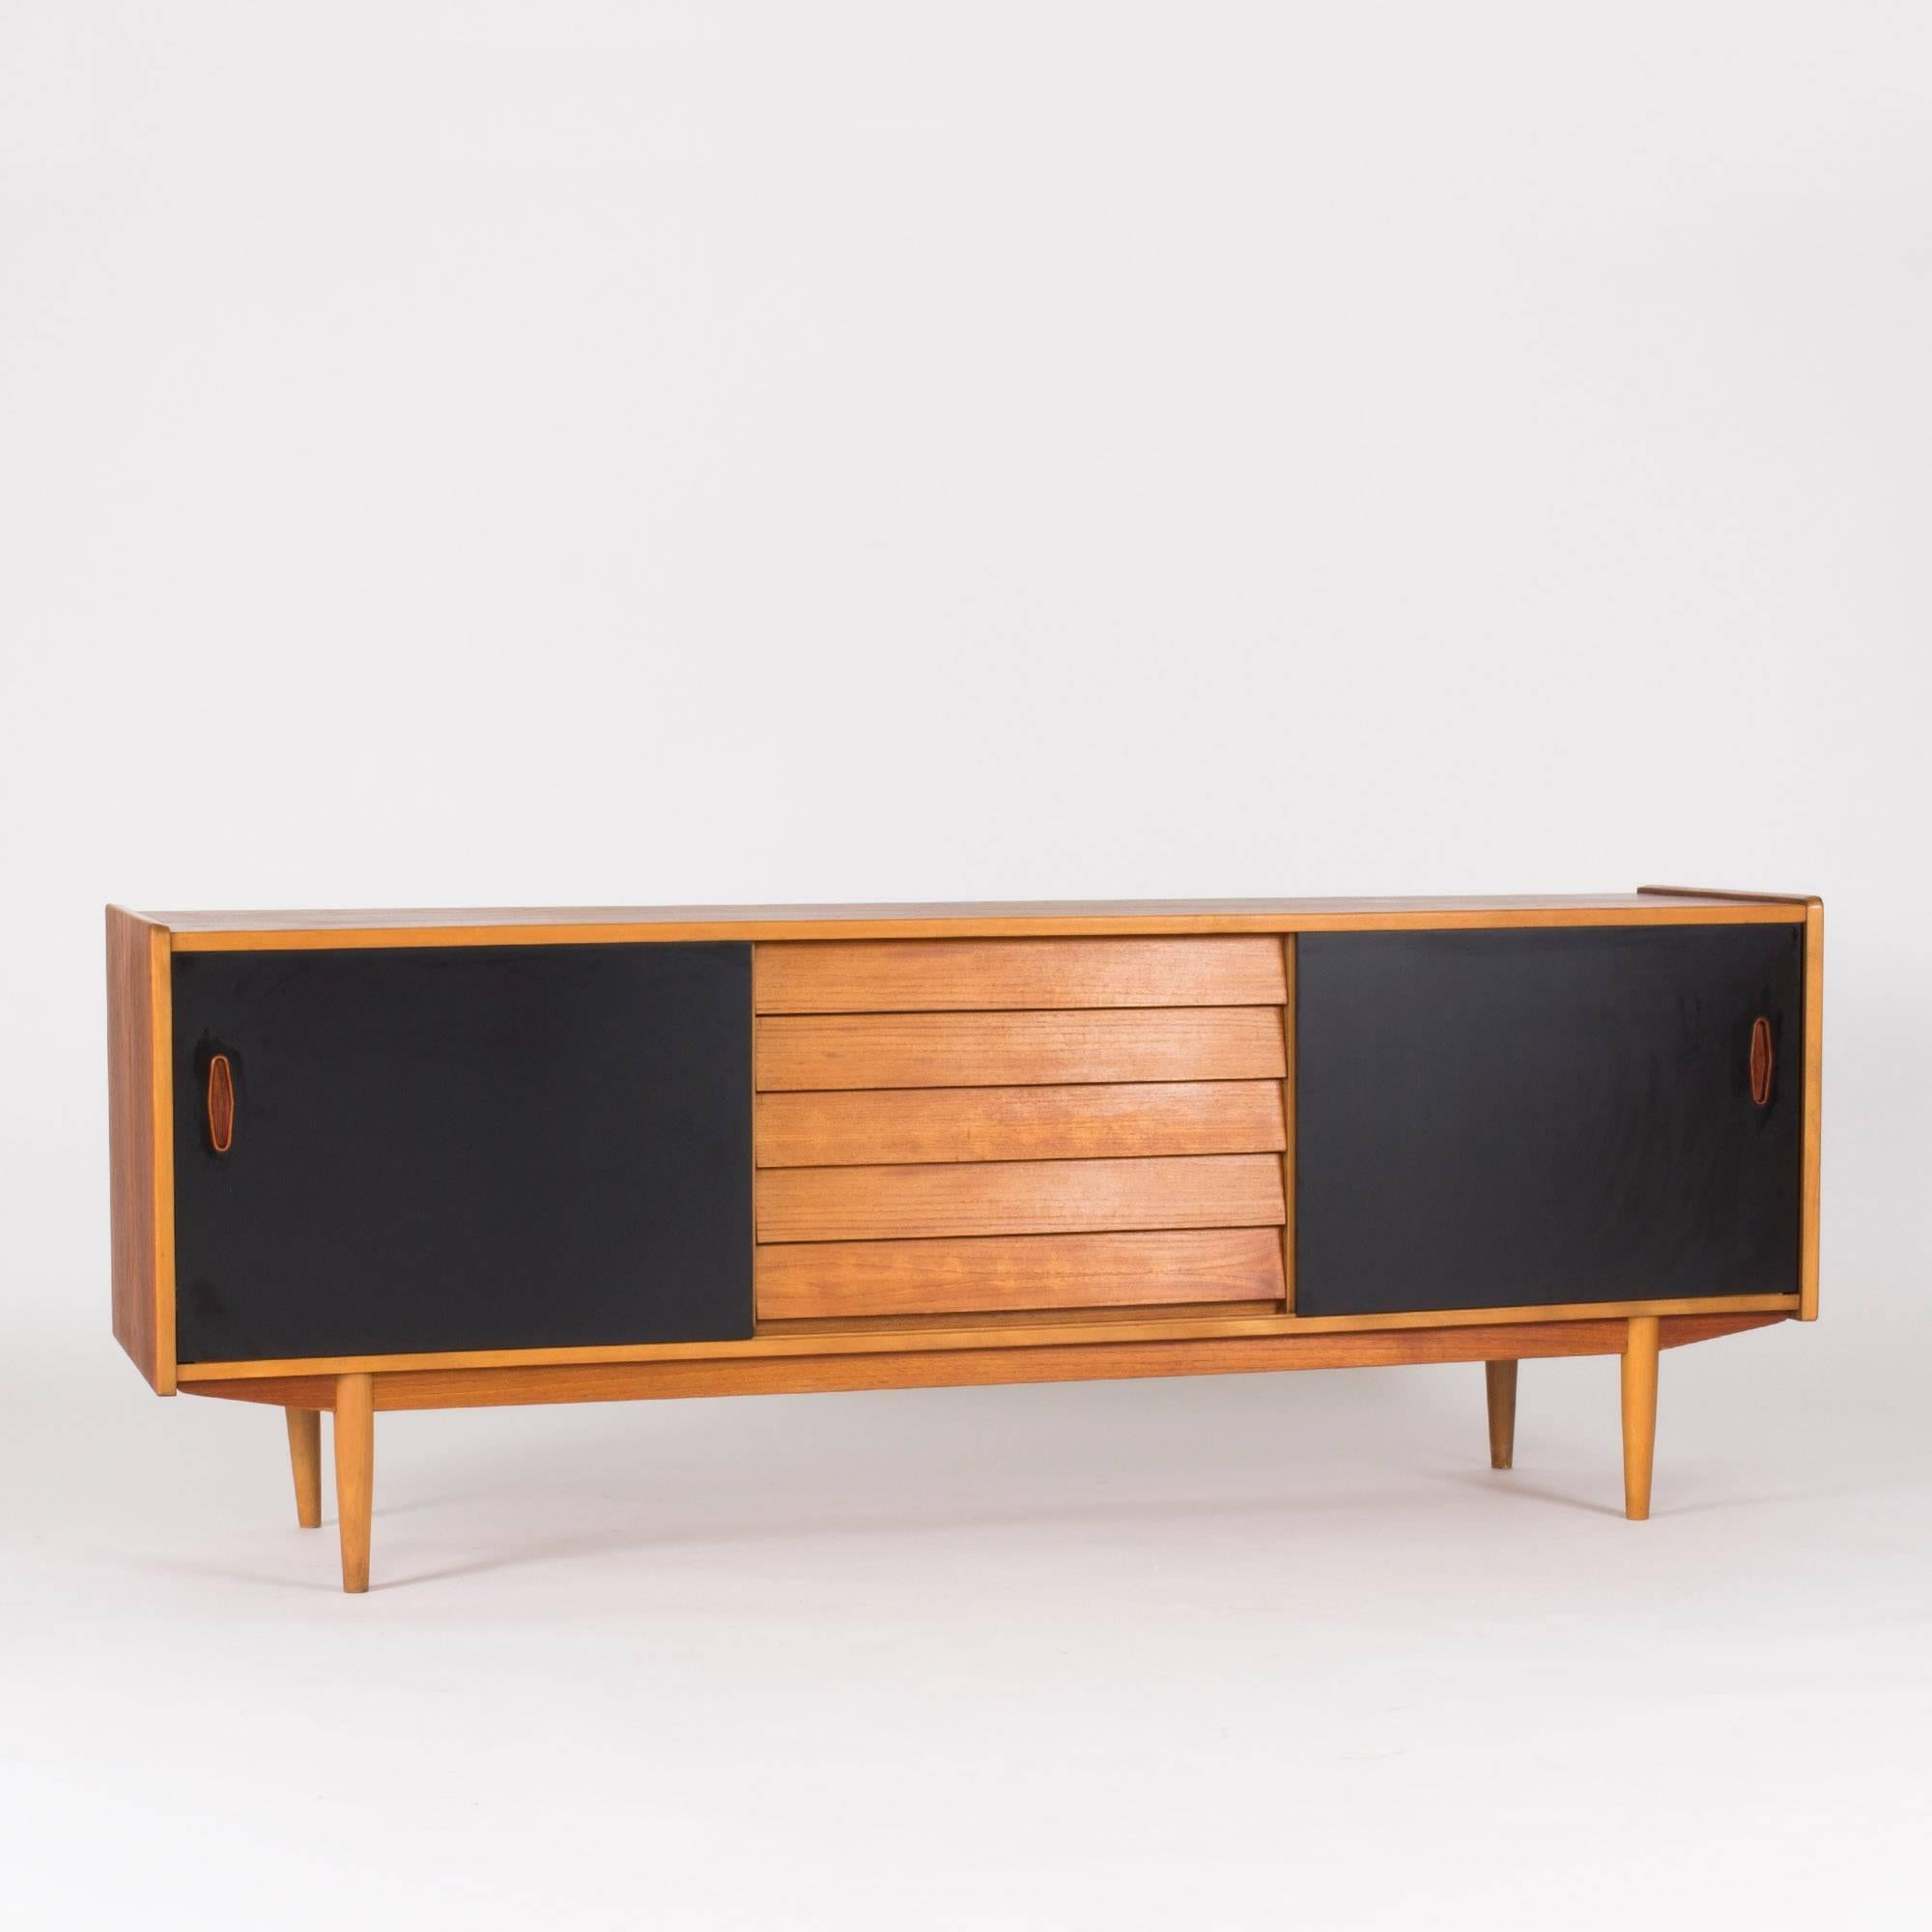 Cool teak sideboard from Hugo Troeds with awesome details. Sliding doors in black with inset teak handles. Drawers in the centre with a graphic relief design. Beautiful condition.